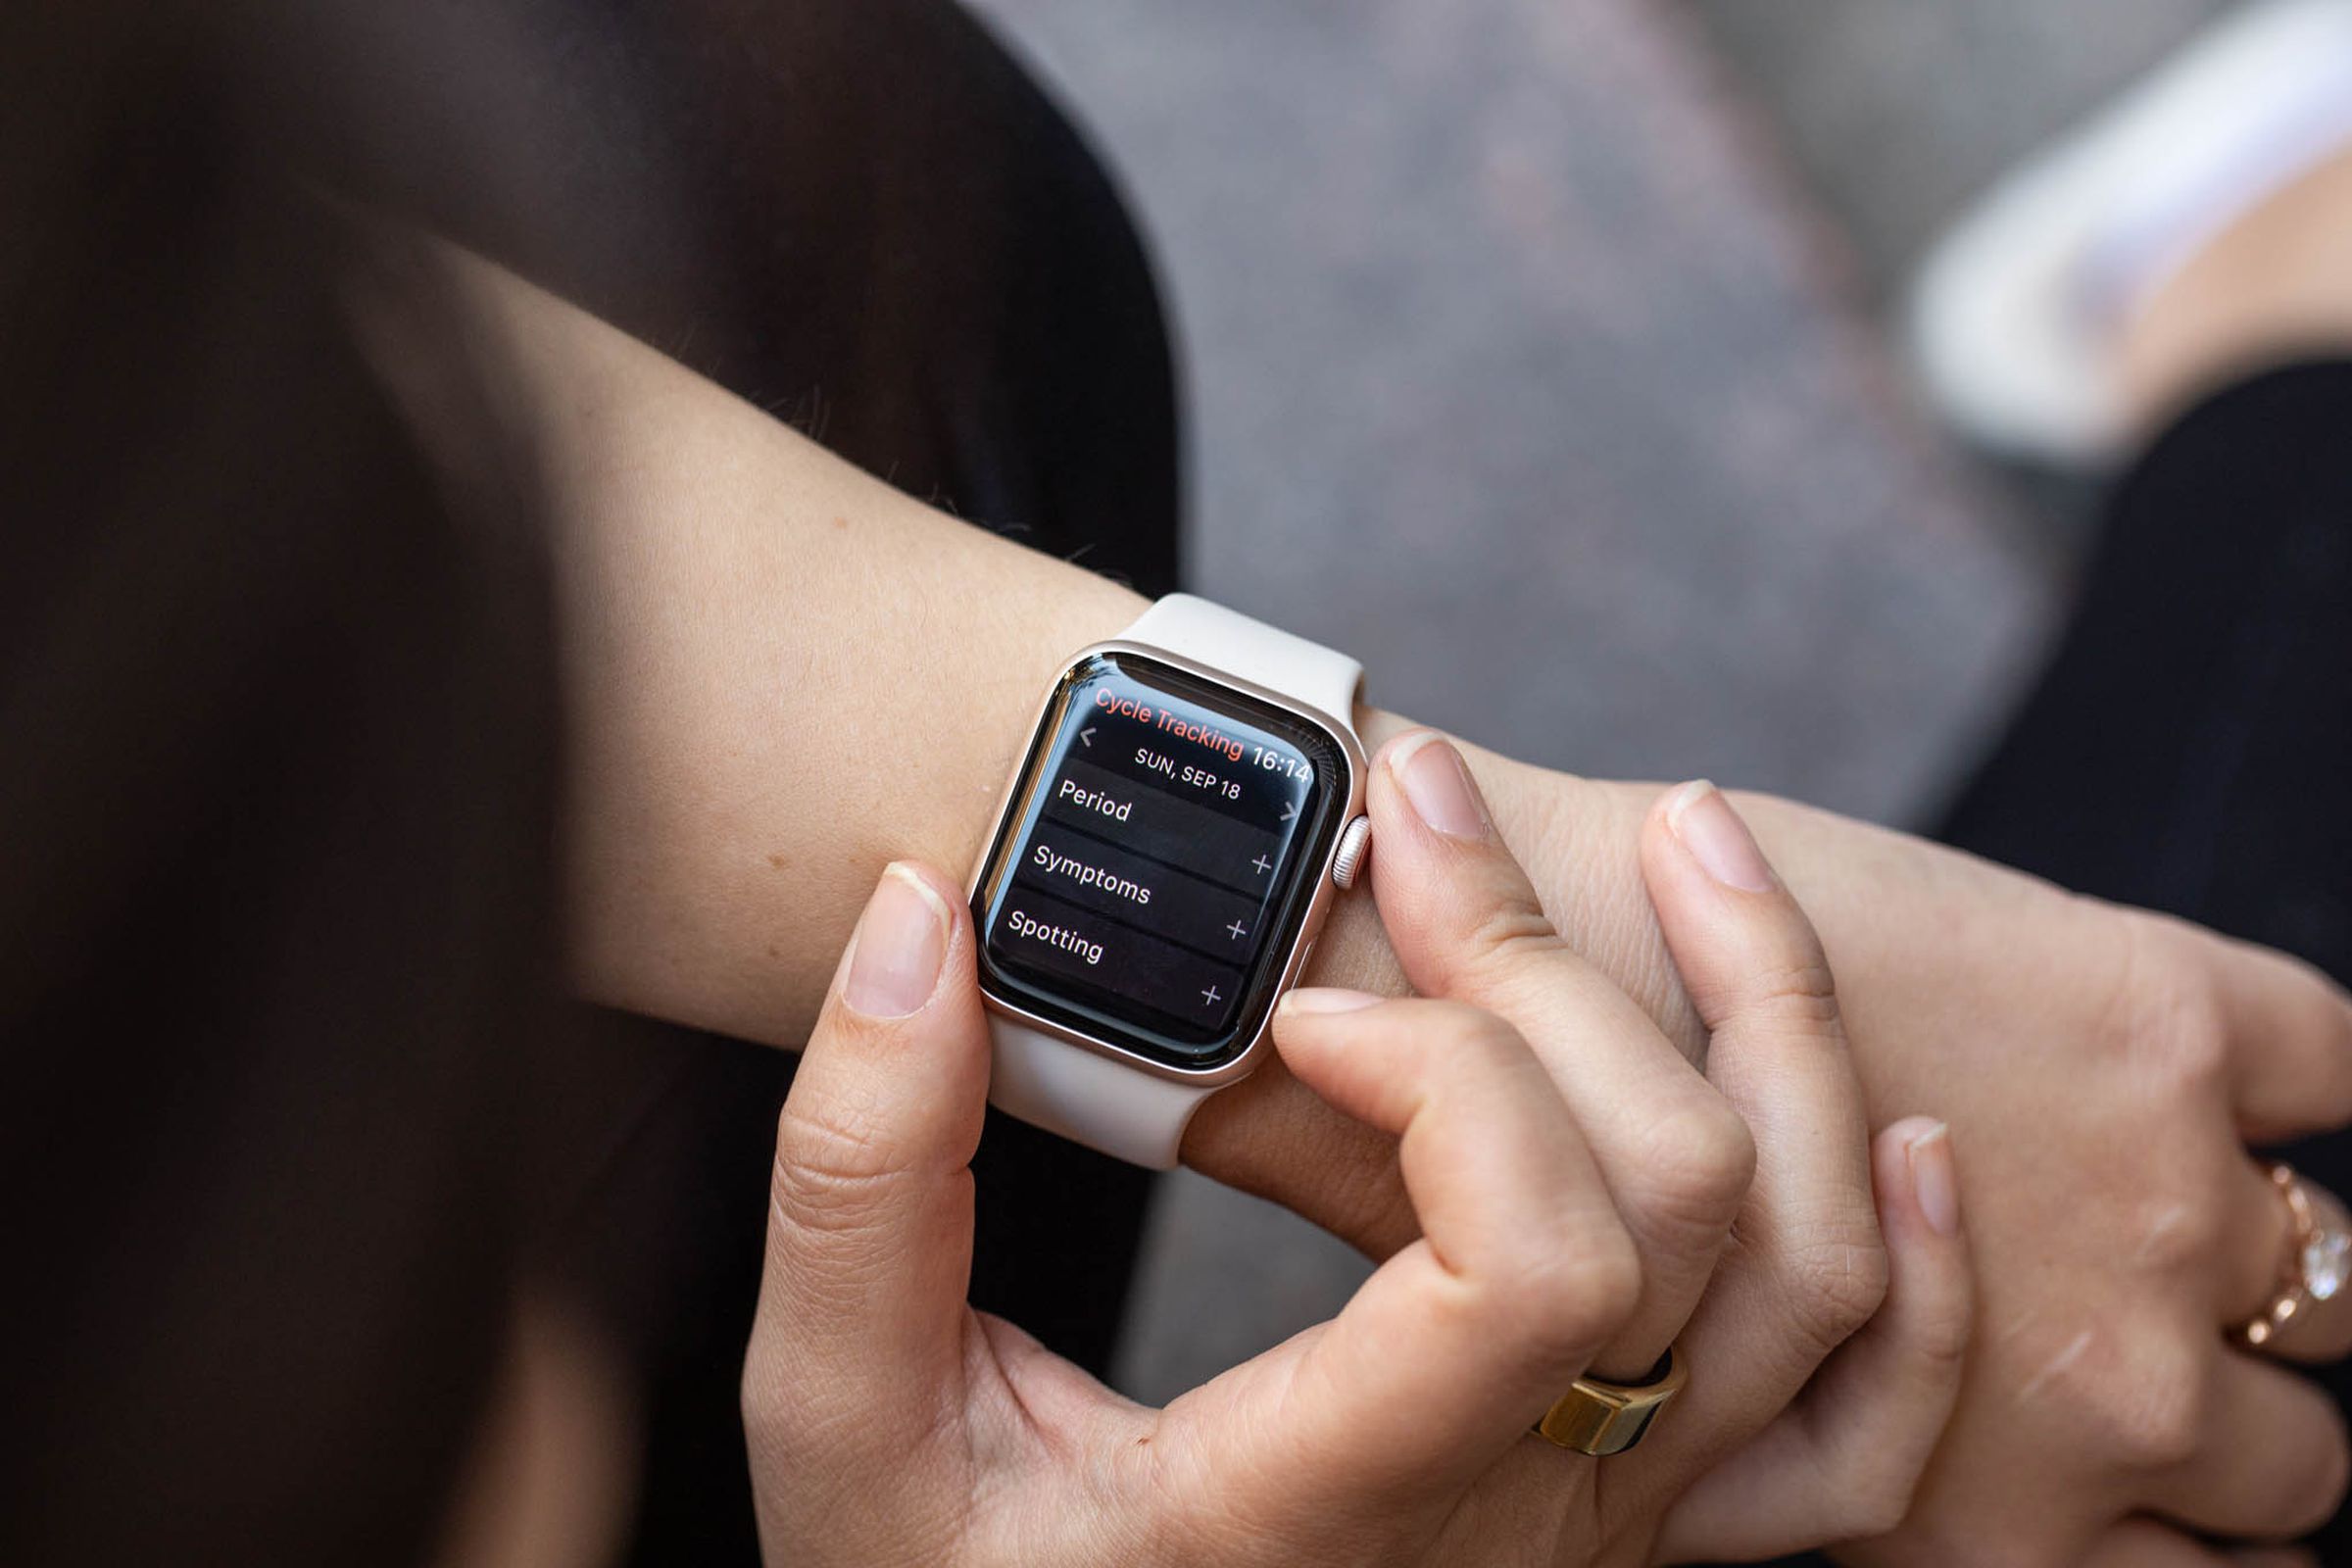 An Apple watch on a wrist showing a screen with cycle tracking options like “period” and “symptoms”